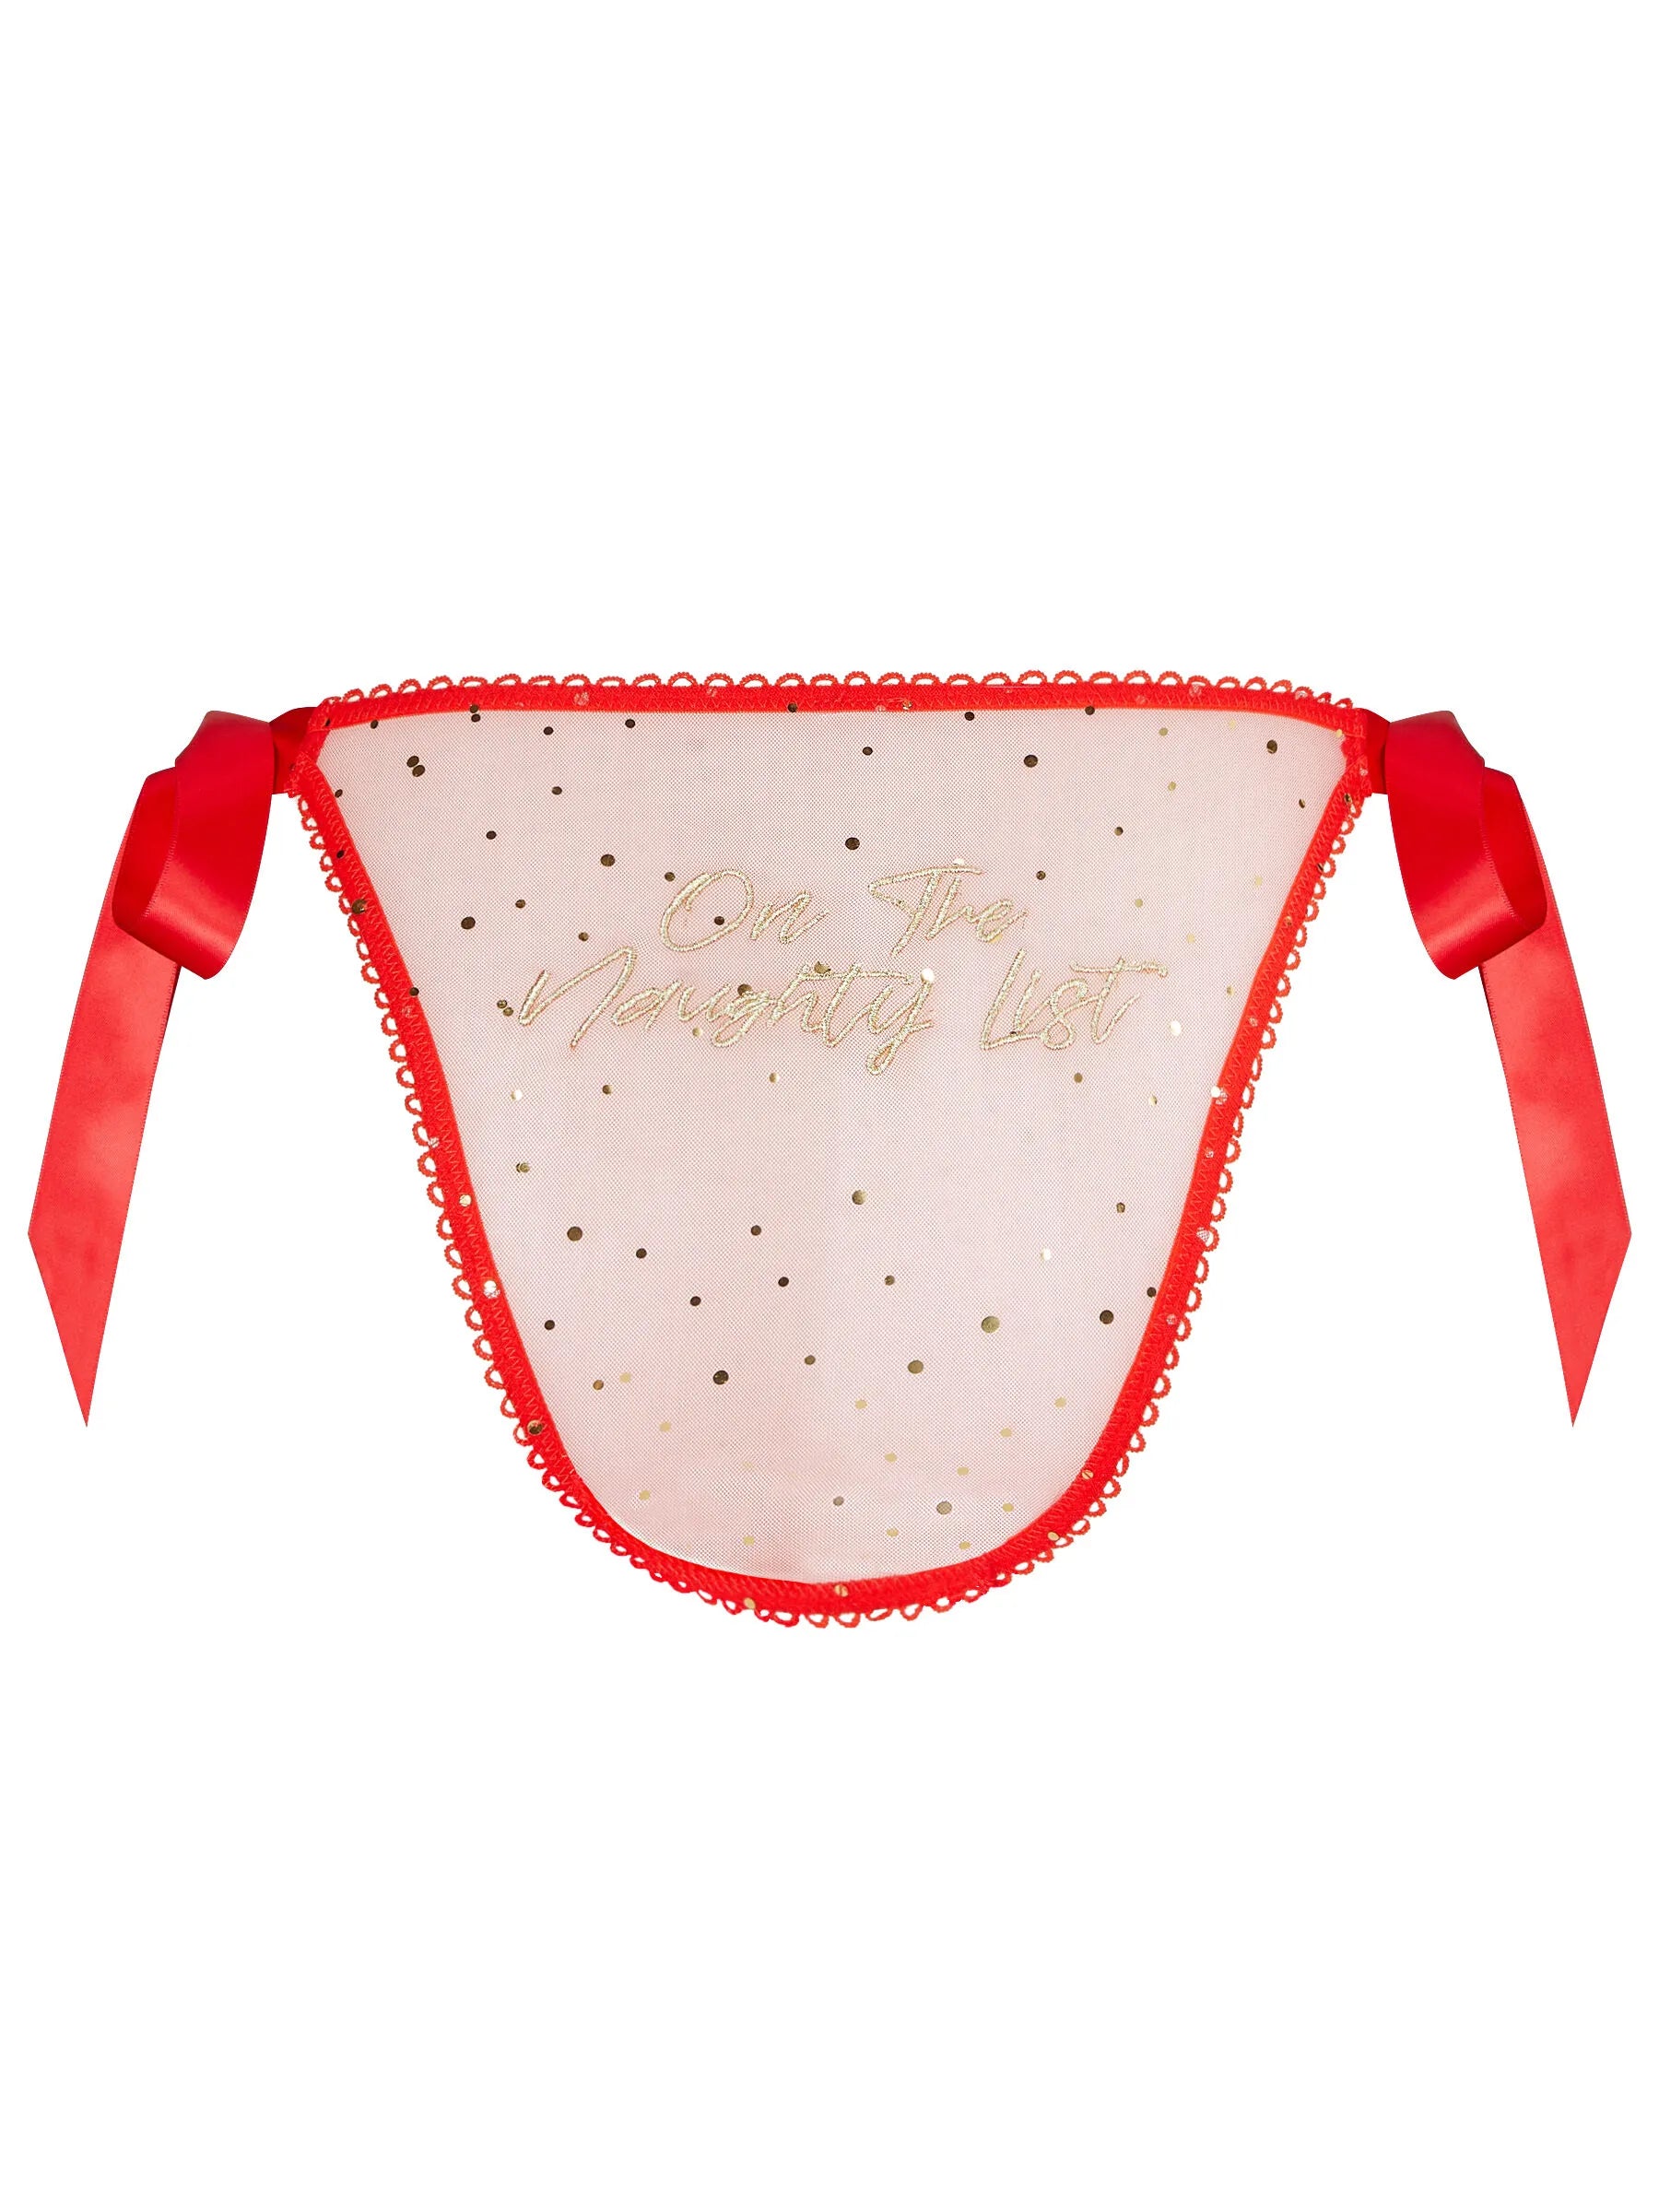 Naughty List Knicker From Ann Summers, Image 04